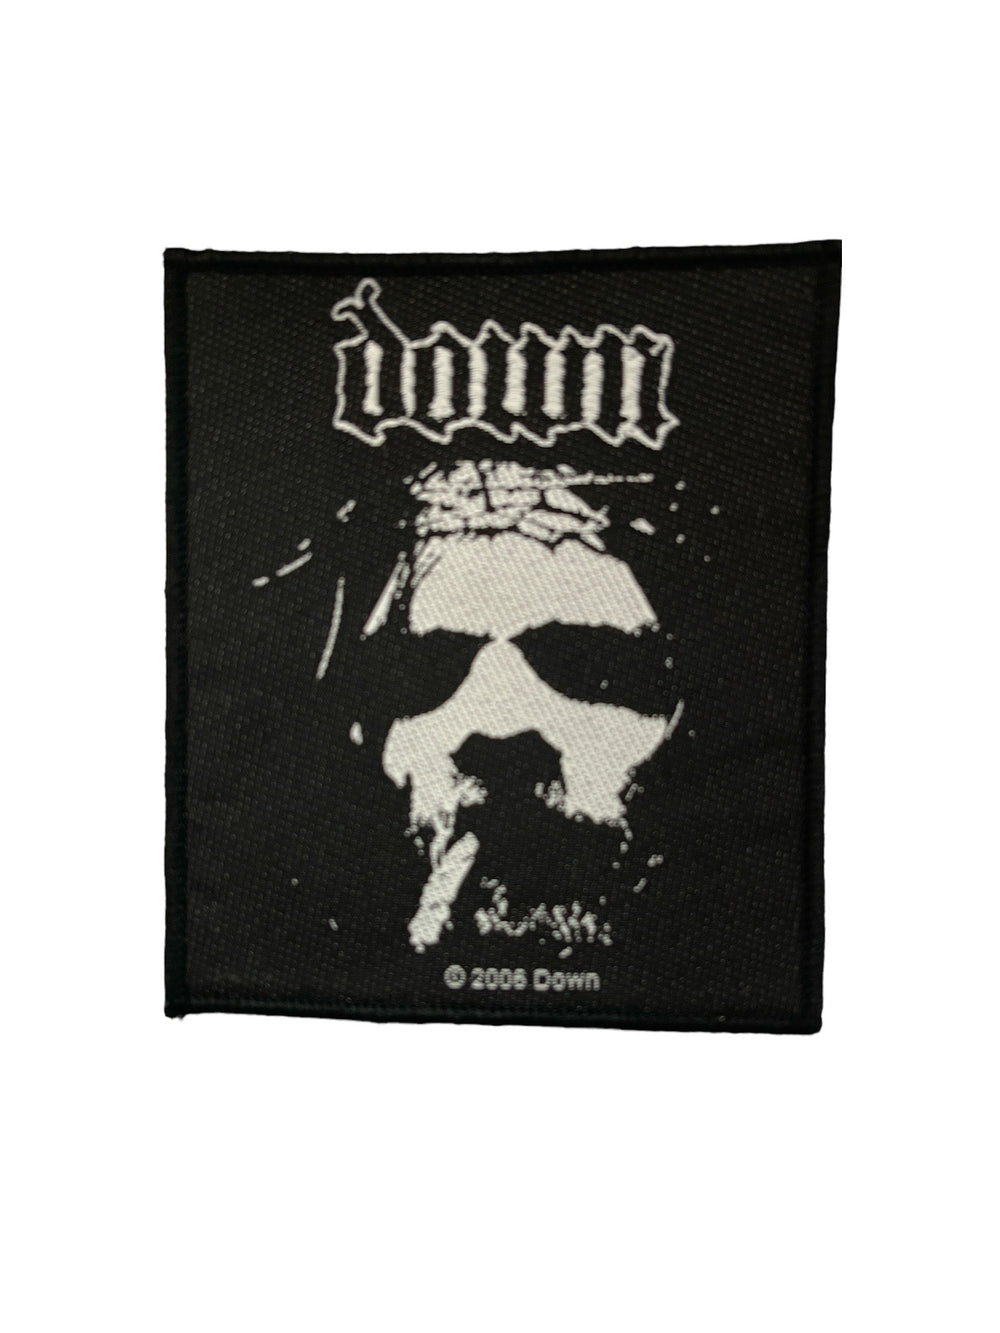 Down Face Official Woven Patch Brand New Official